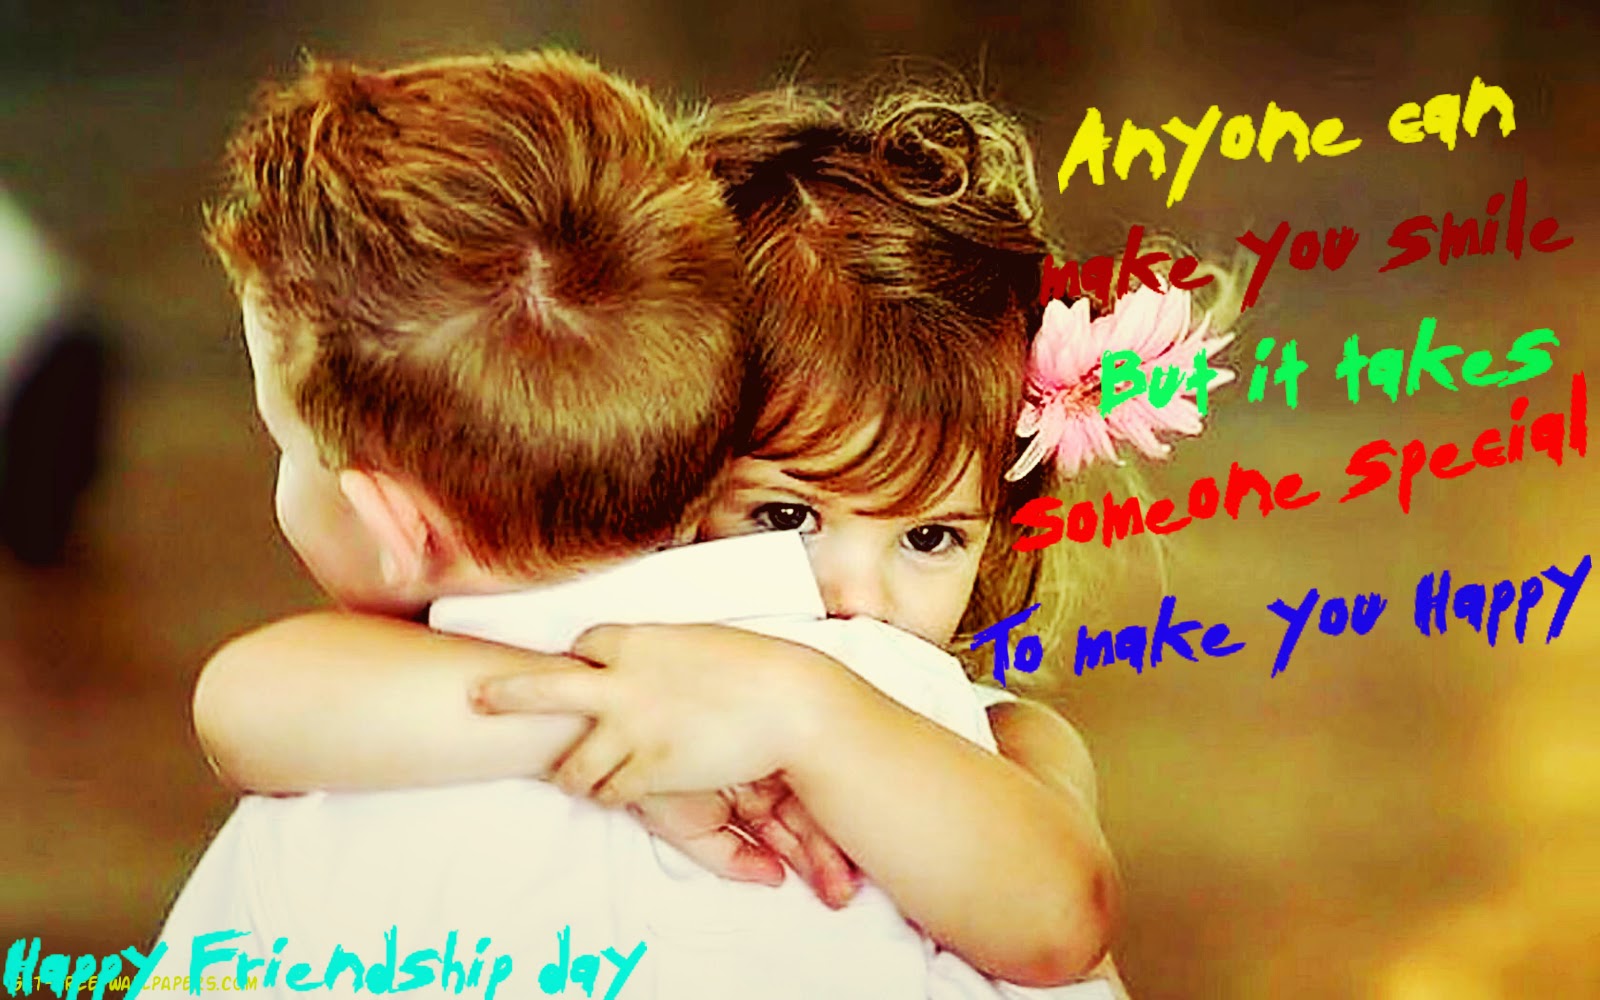 Happy Friendship Day 2014 HD Wallpapers Timeline cover photos from Kids